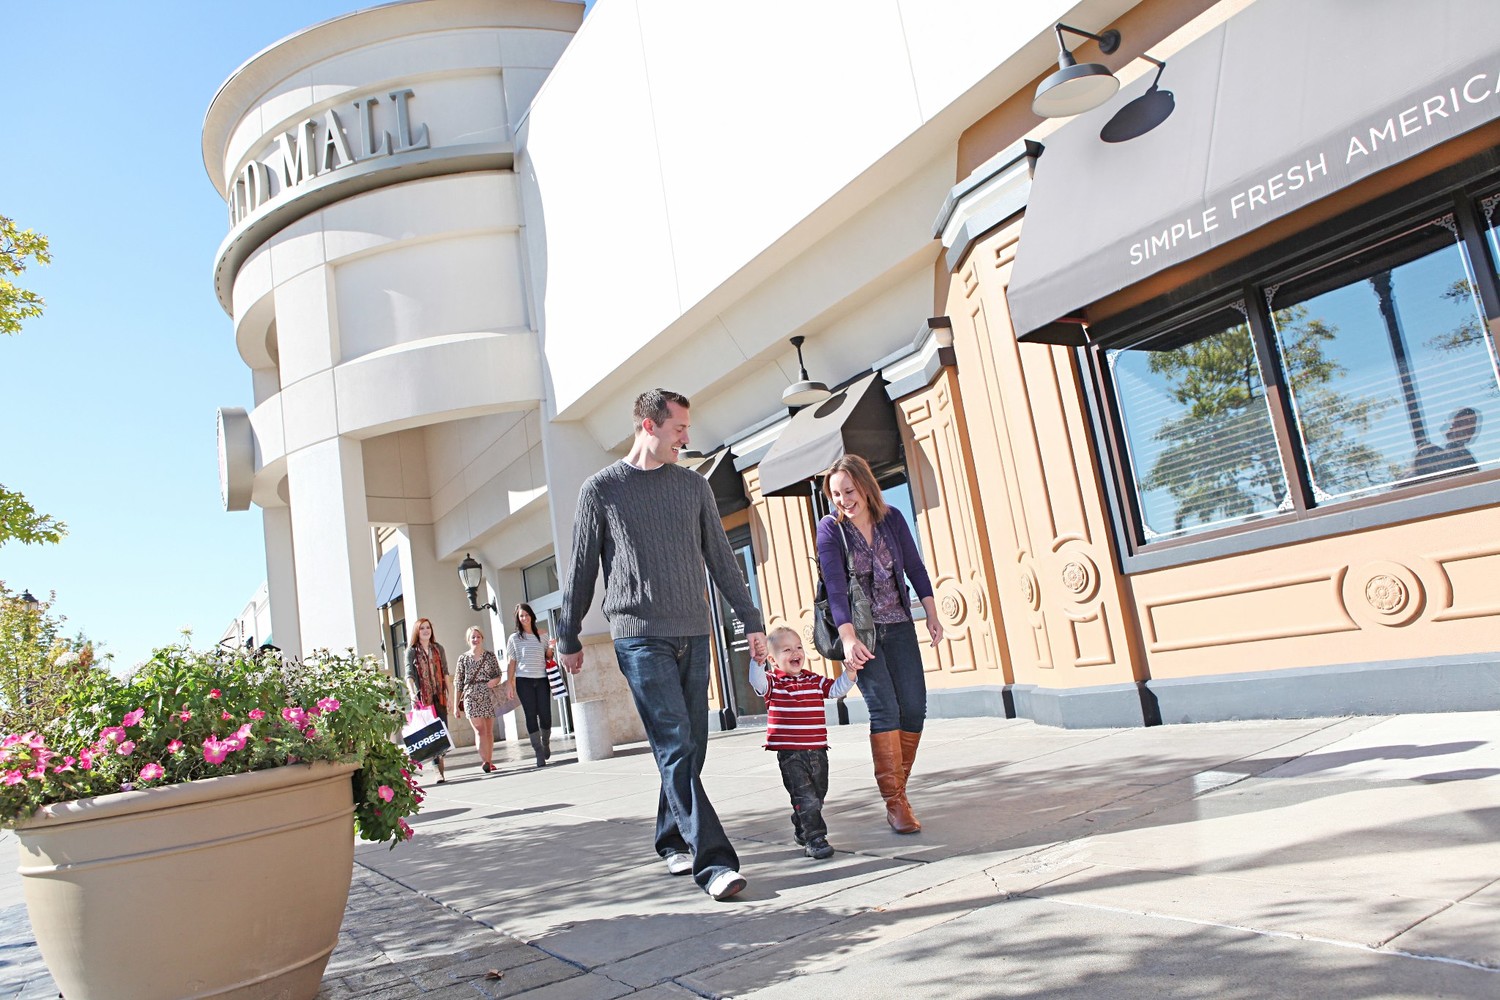 Battlefield Mall will soon count Dry Goods as a tenant.